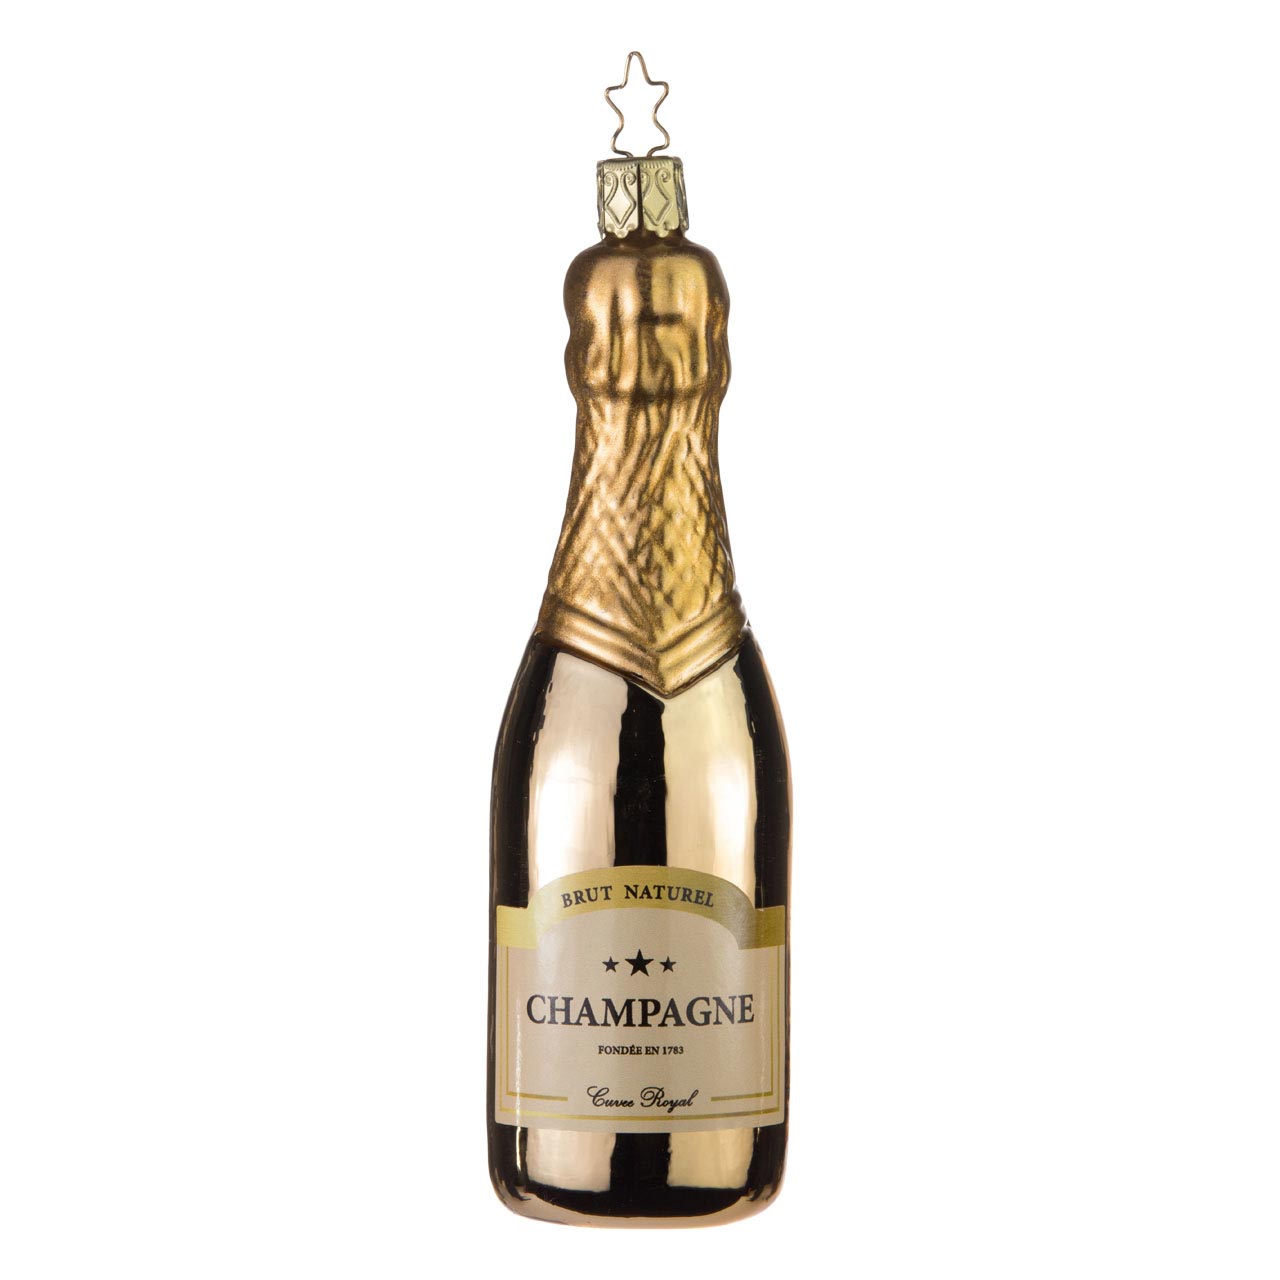 Champagne, or